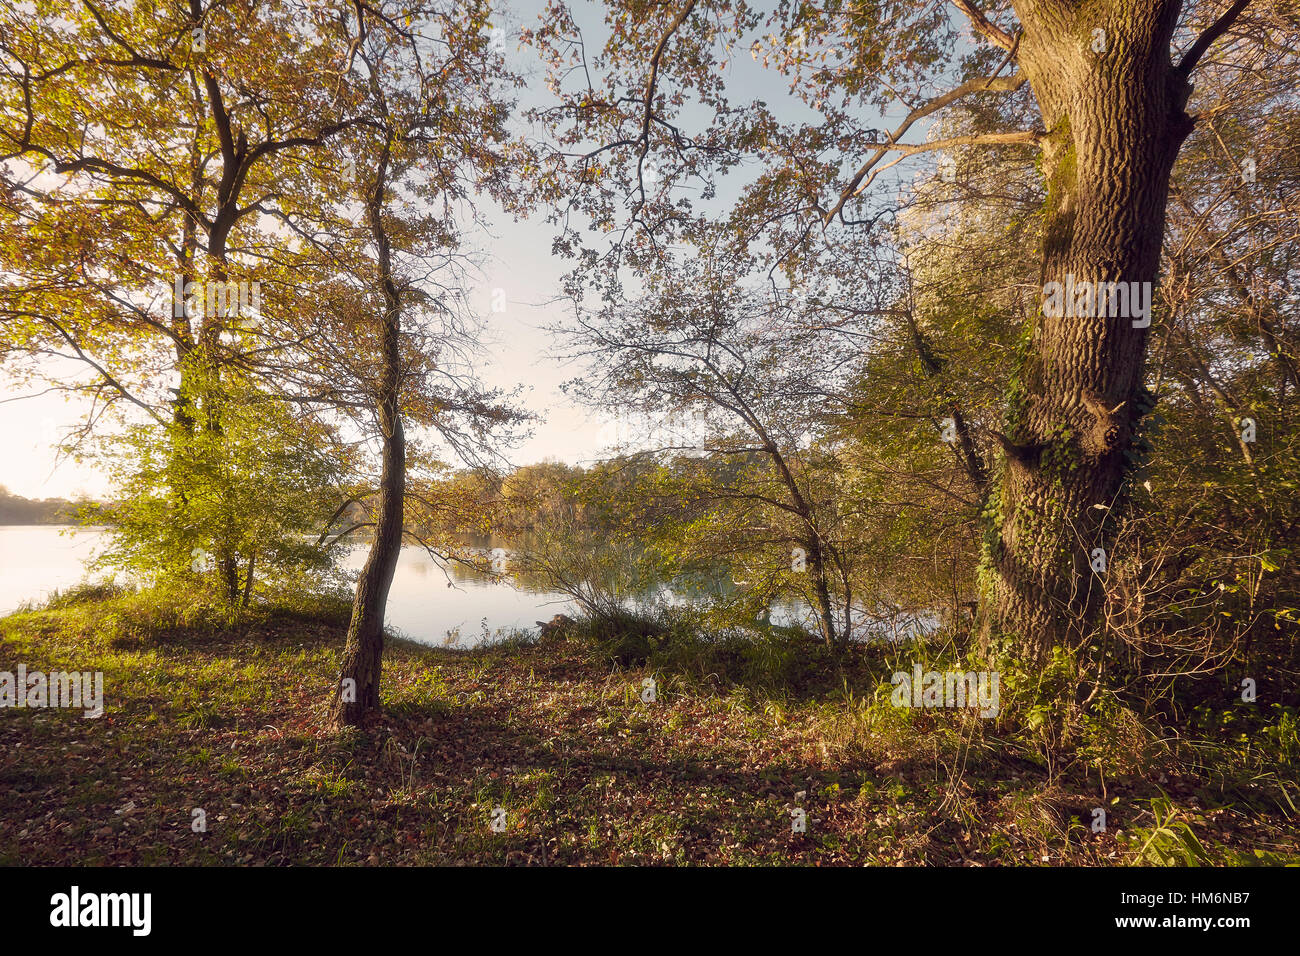 Lakeside in the sun with trees and colored autumn leaves Stock Photo